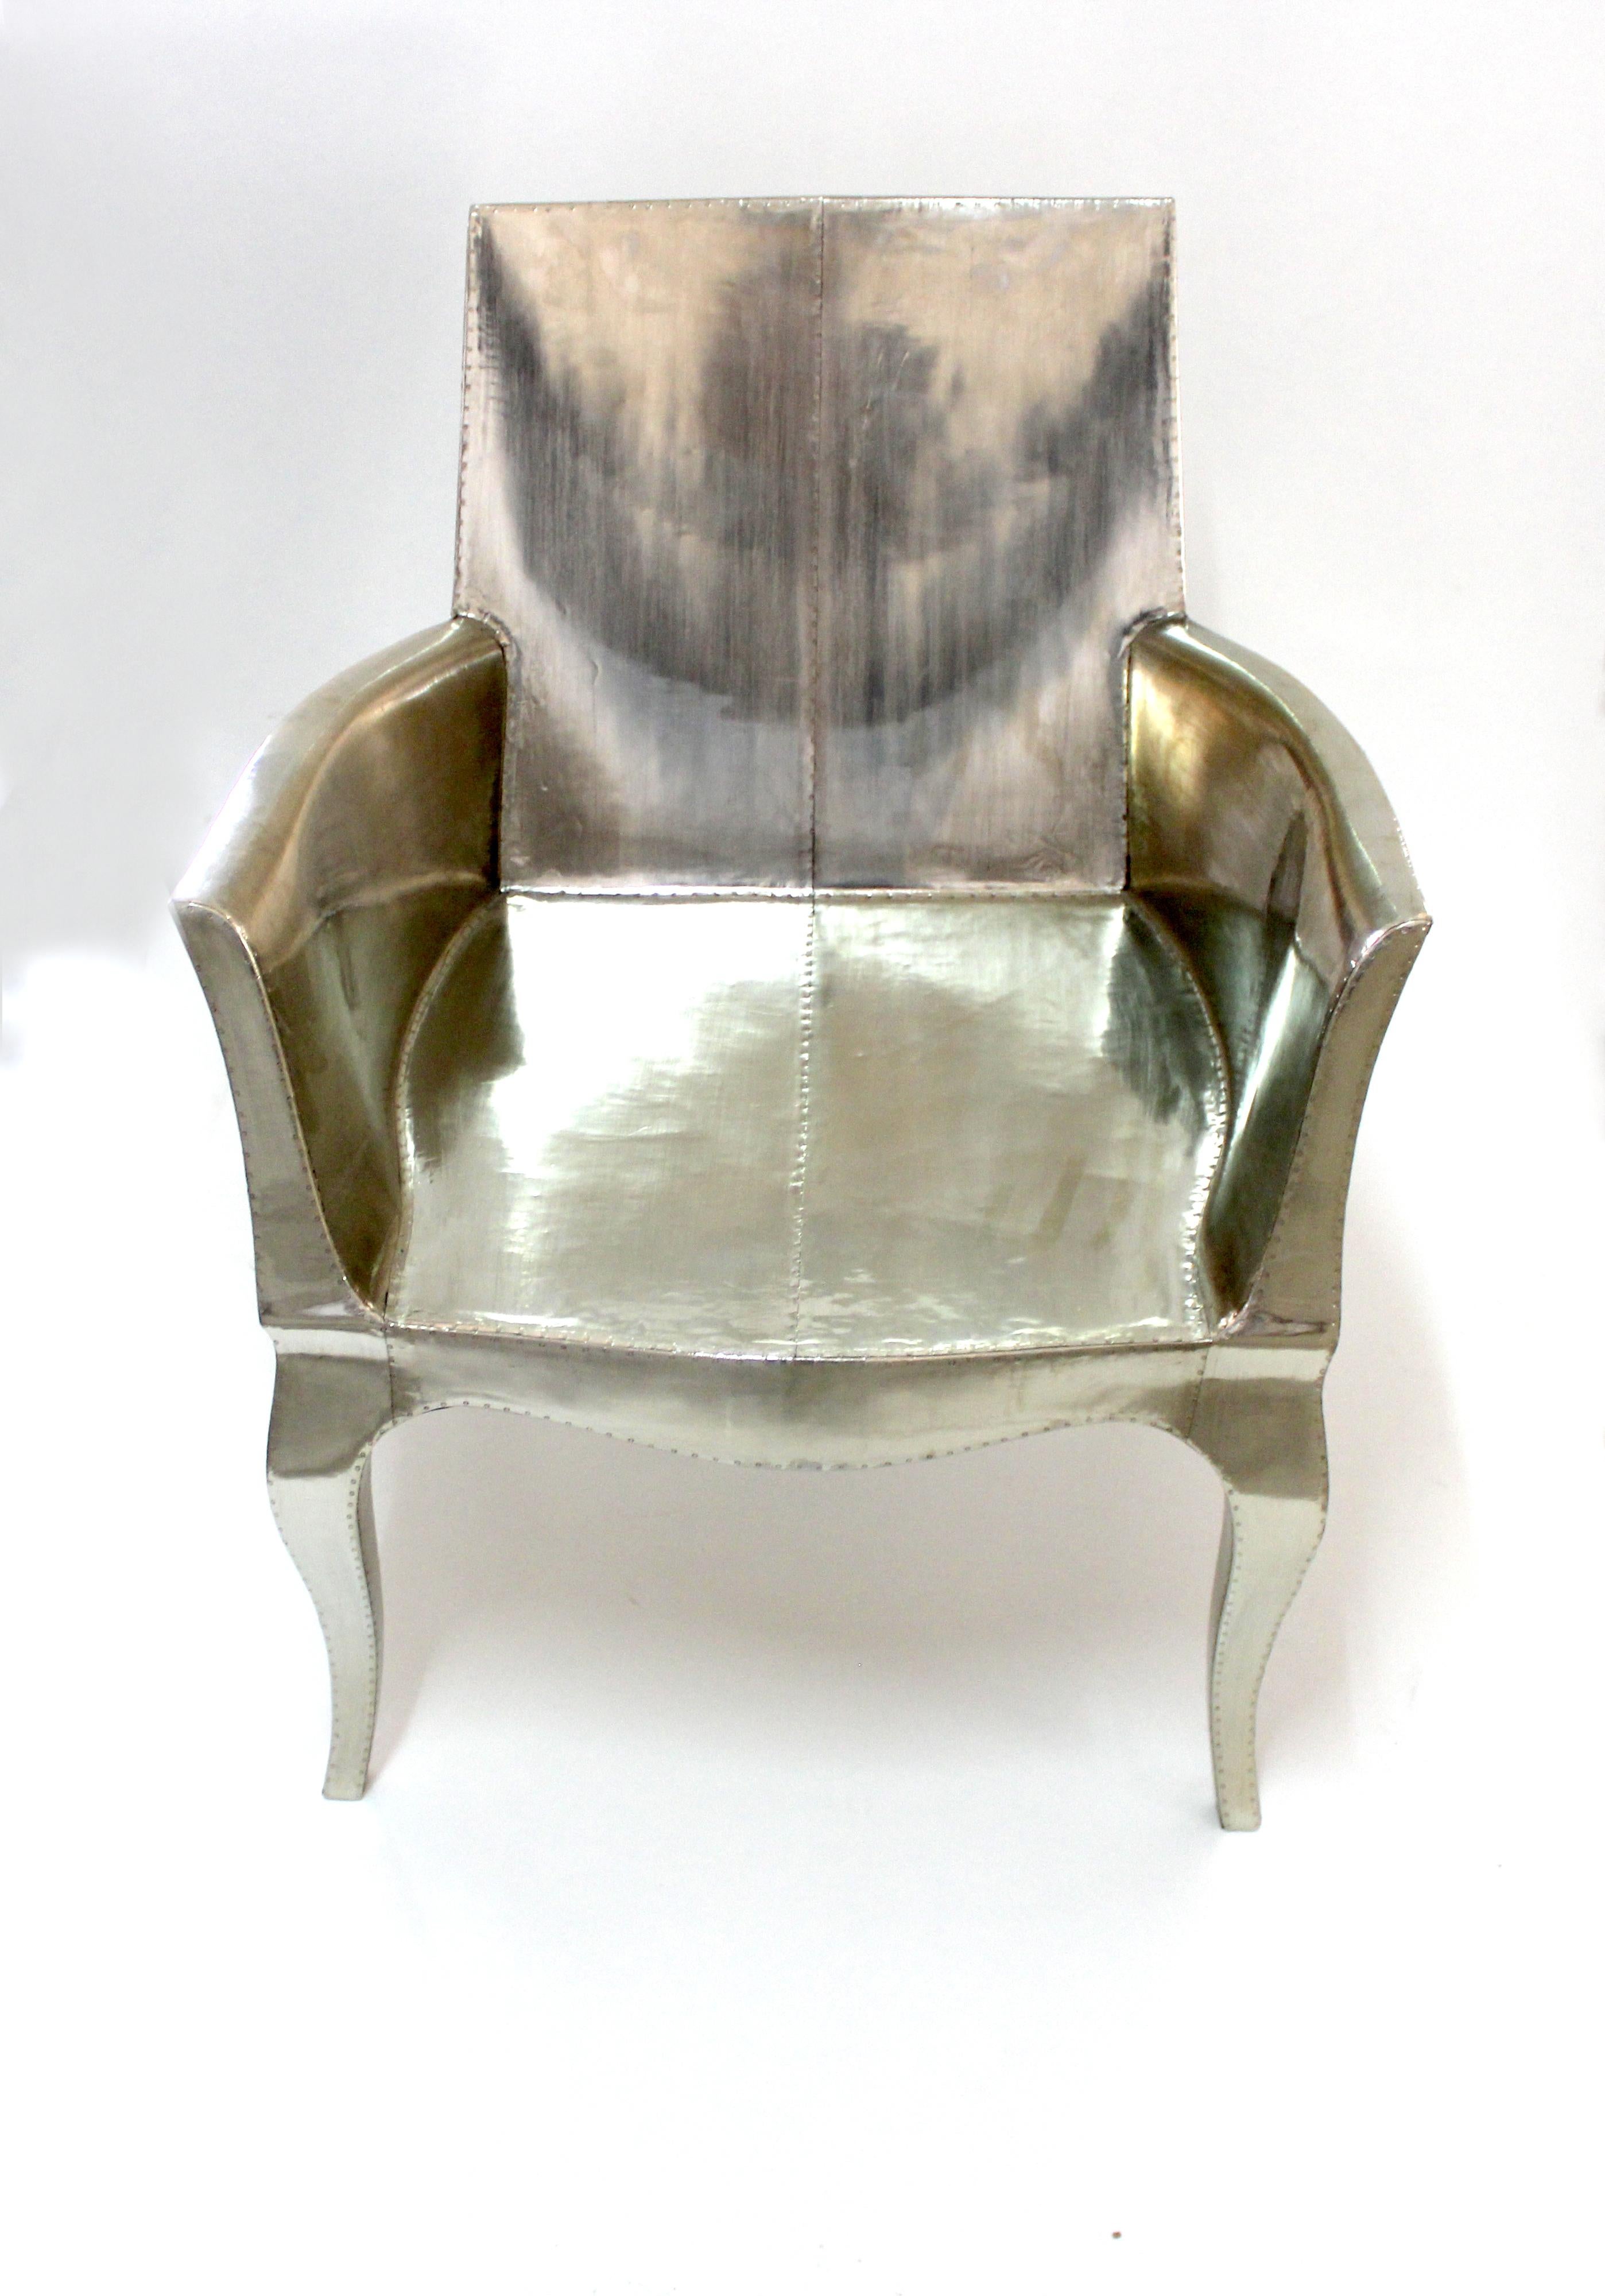 Art Deco Desk Chair in Smooth Brass by Paul Mathieu for S. Odegard For Sale 8